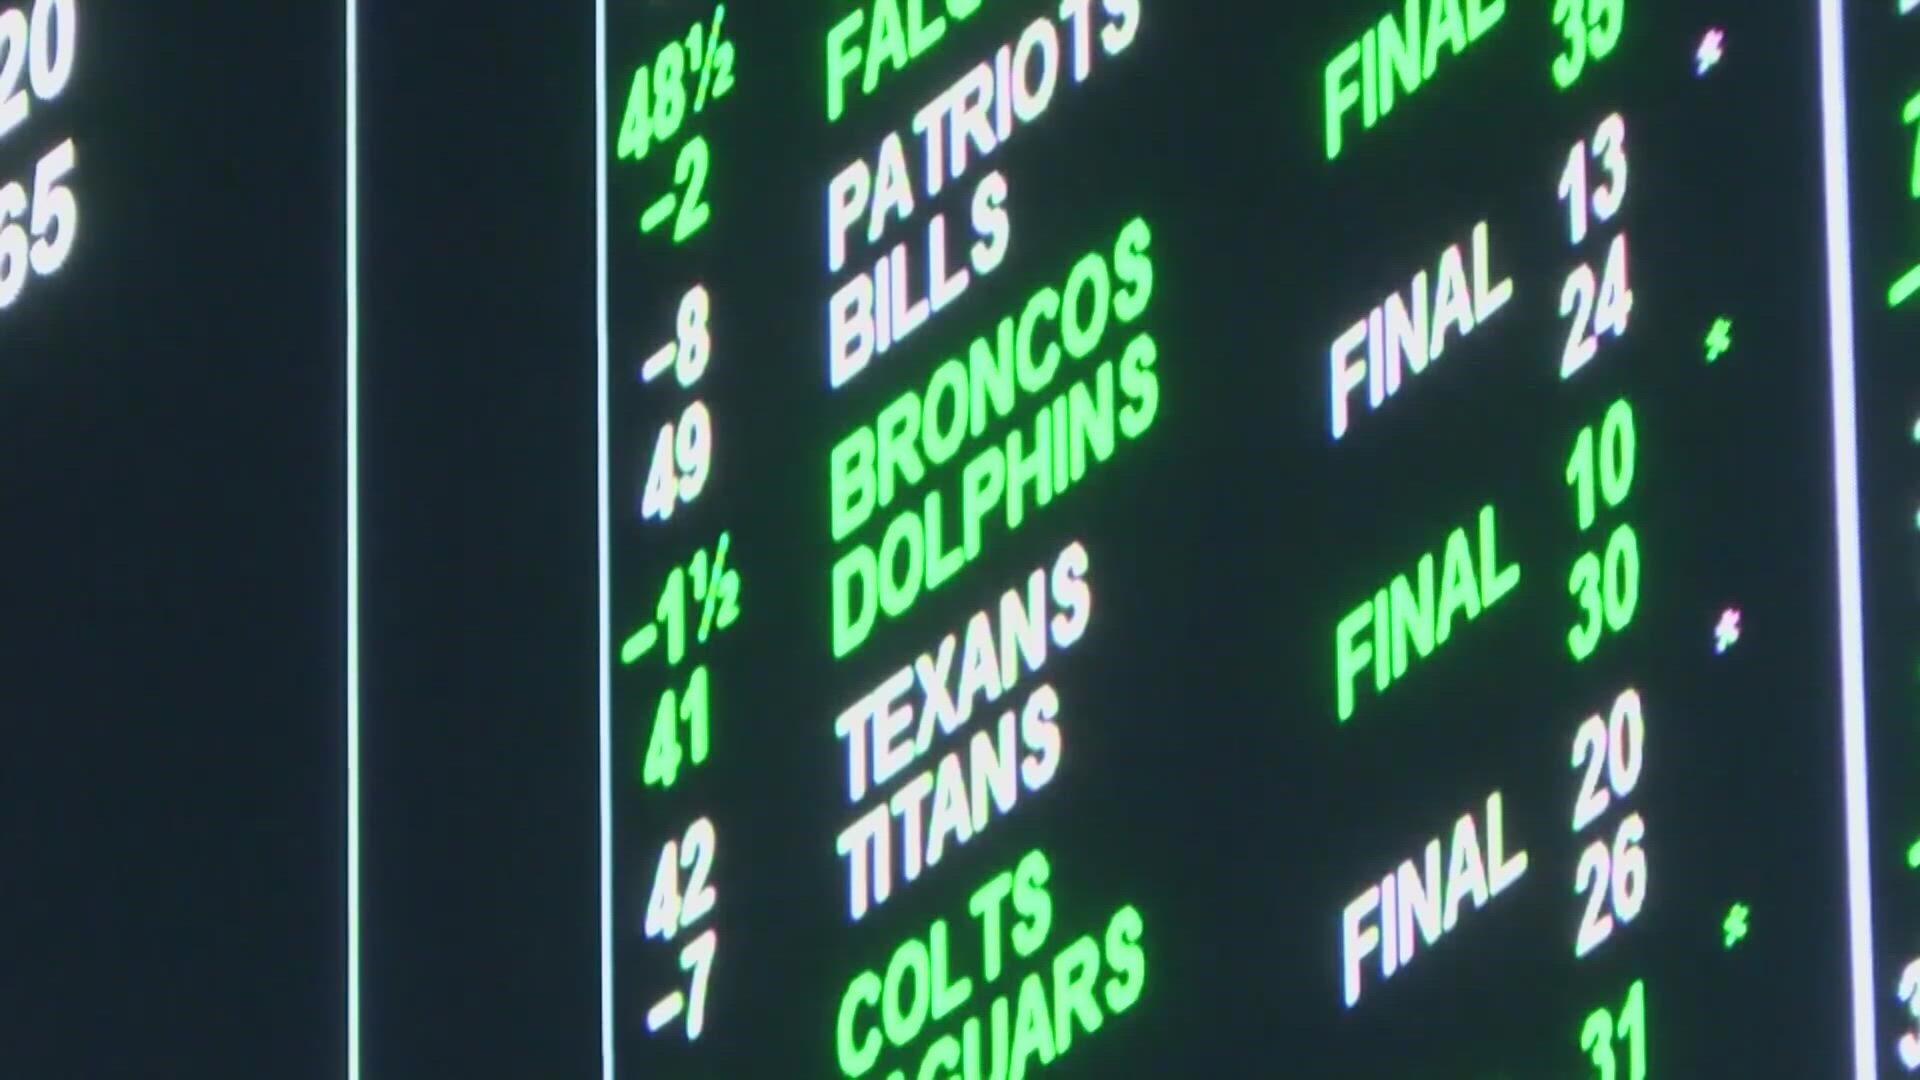 New bills have been proposed this week that would legalize online sports betting.